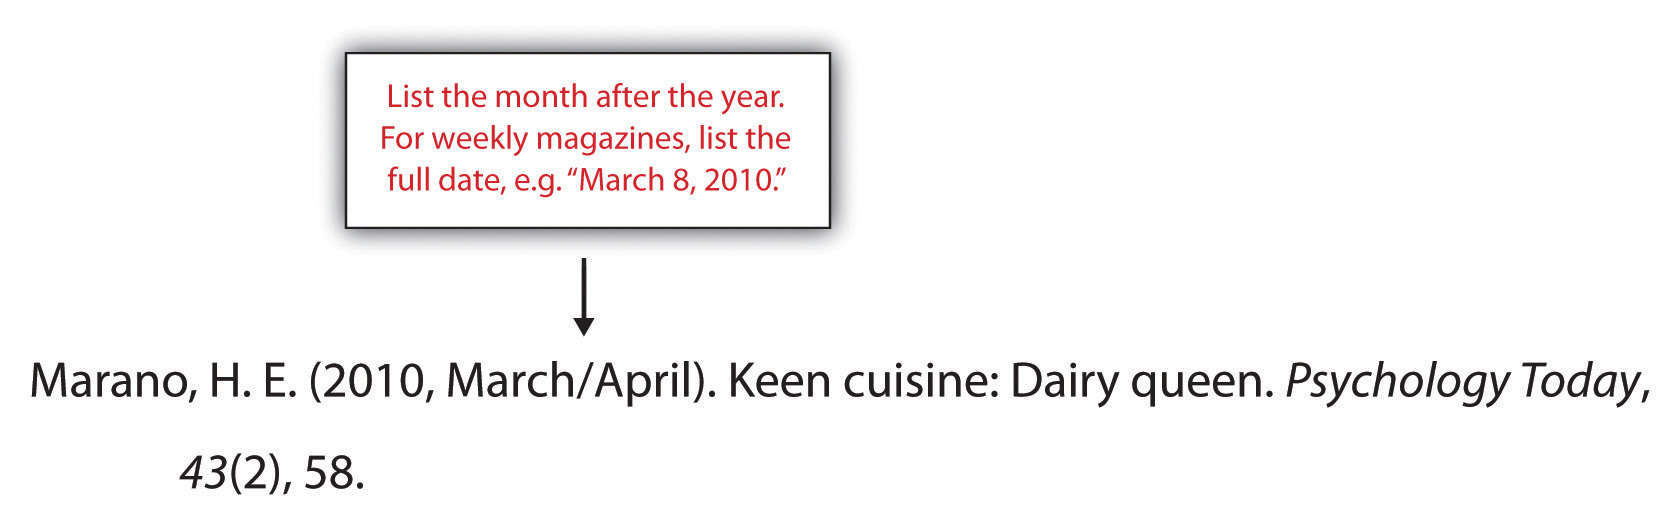 When creating a references section, oist the month after the year. For weekly magazines, list the full date, e.g.